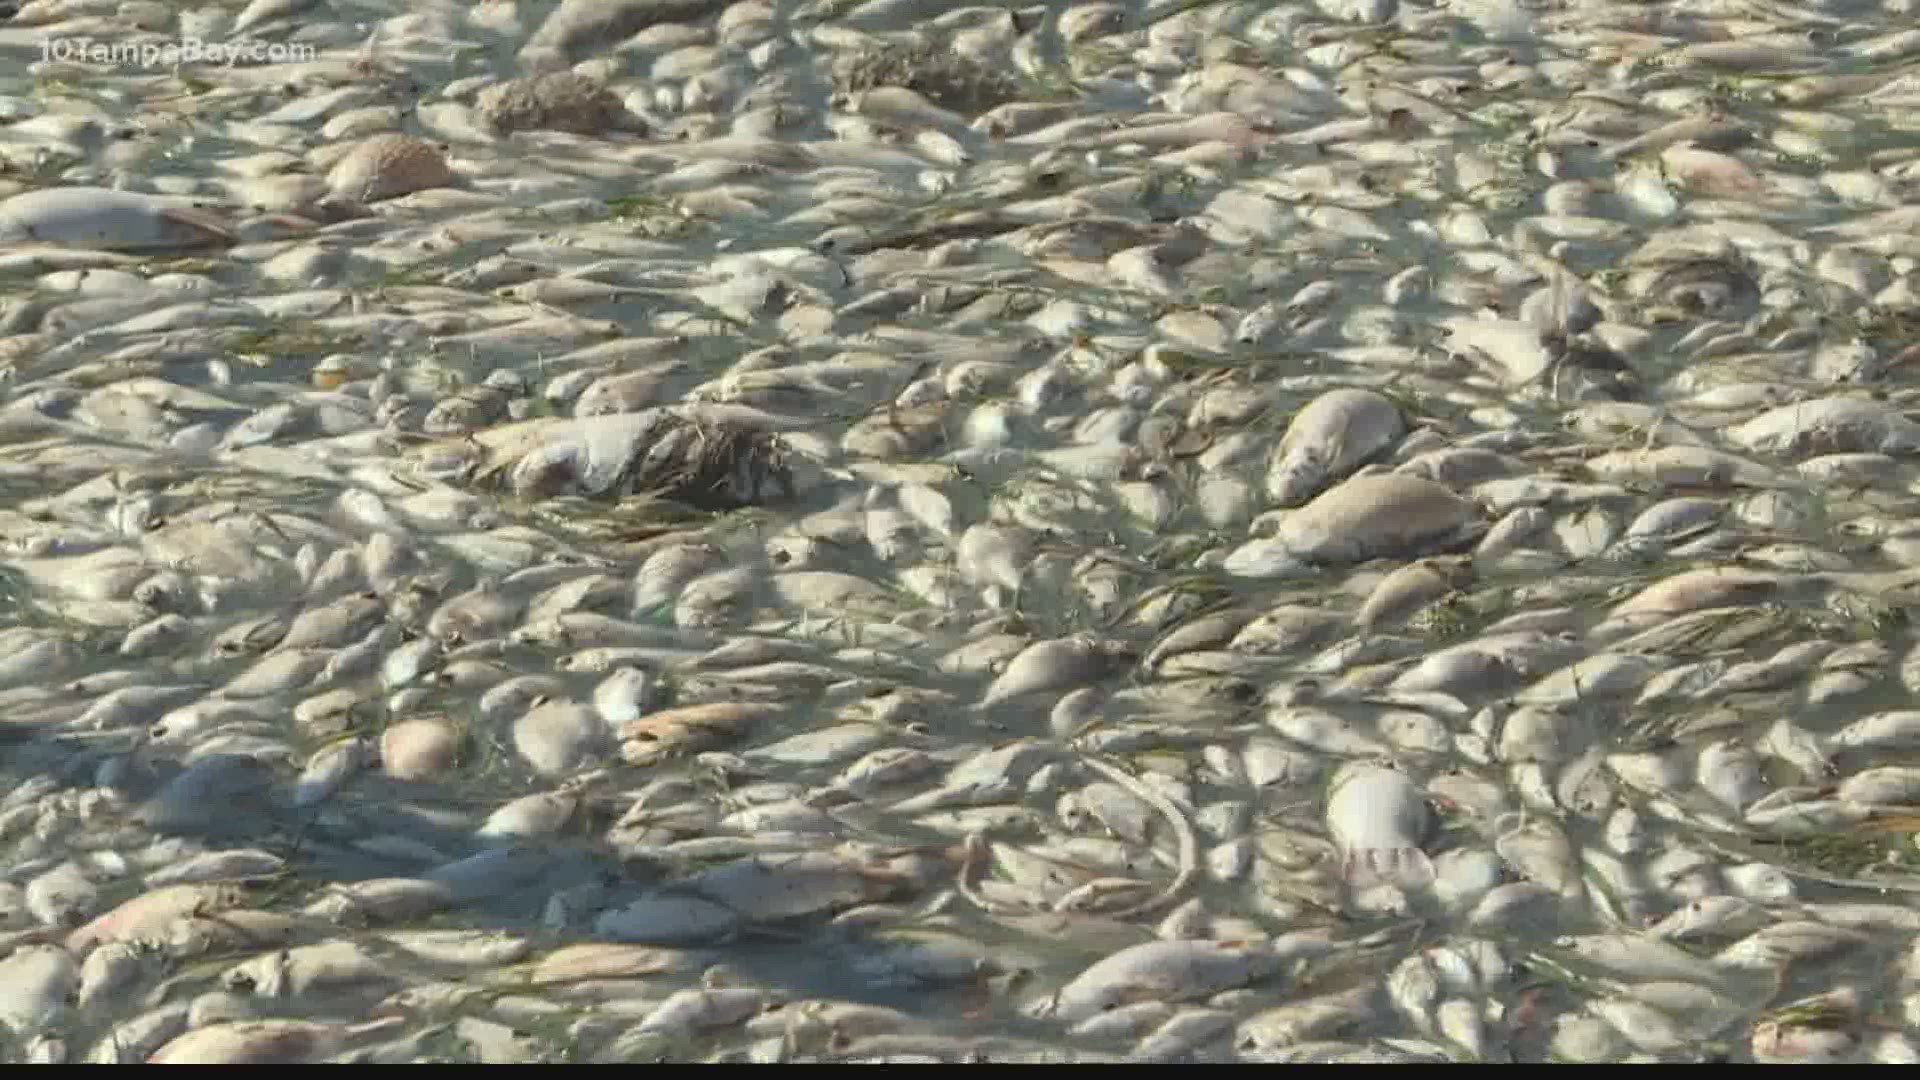 FWC says dead fish and respiratory irritation have been reported in southwest Florida.